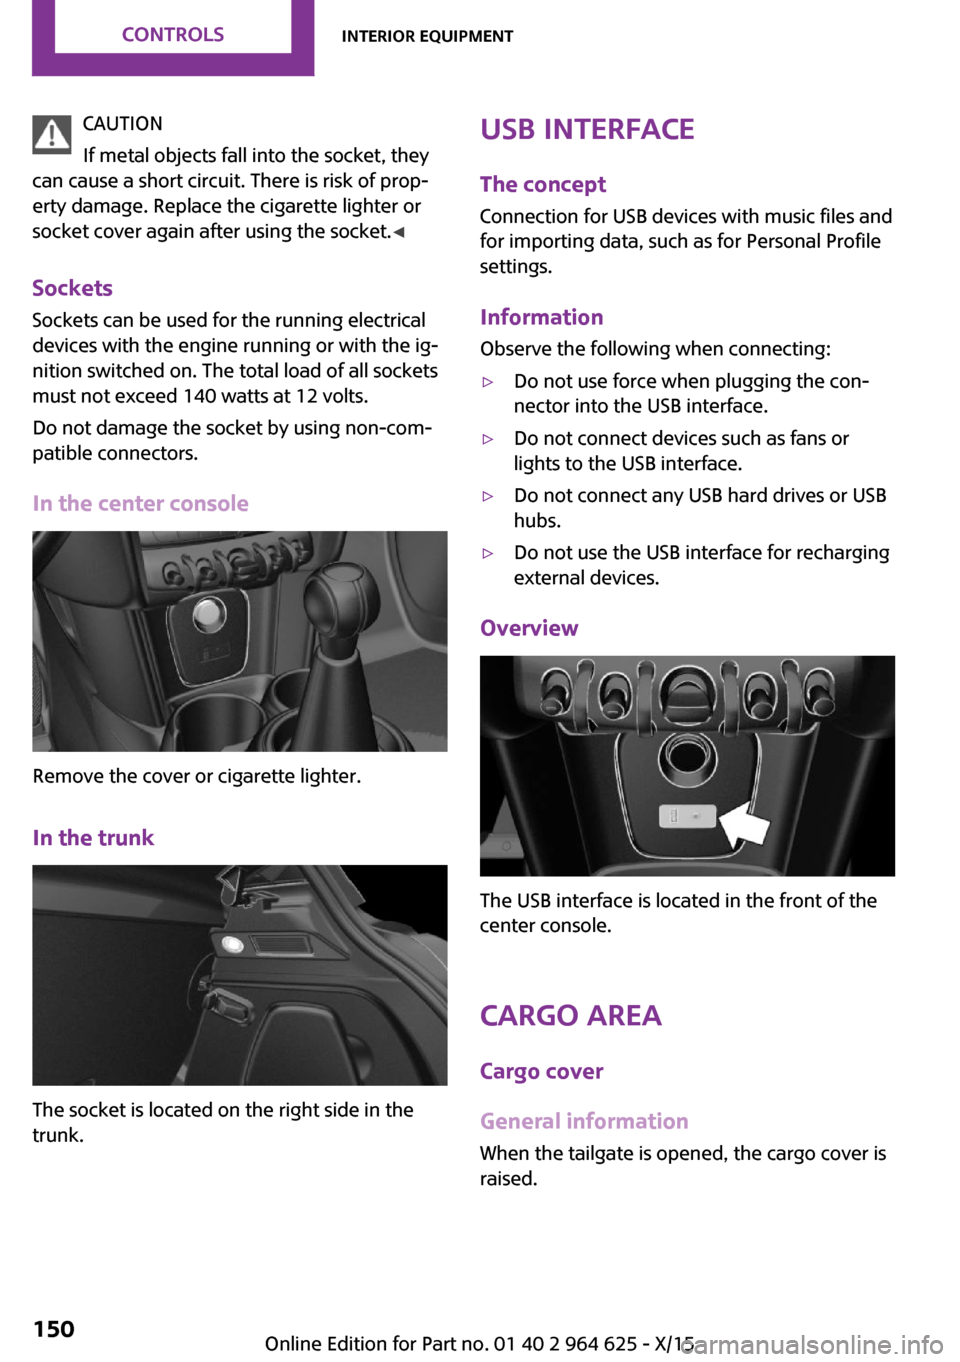 MINI 3 door 2015  Owners Manual CAUTION
If metal objects fall into the socket, they
can cause a short circuit. There is risk of prop‐
erty damage. Replace the cigarette lighter or
socket cover again after using the socket. ◀
Soc